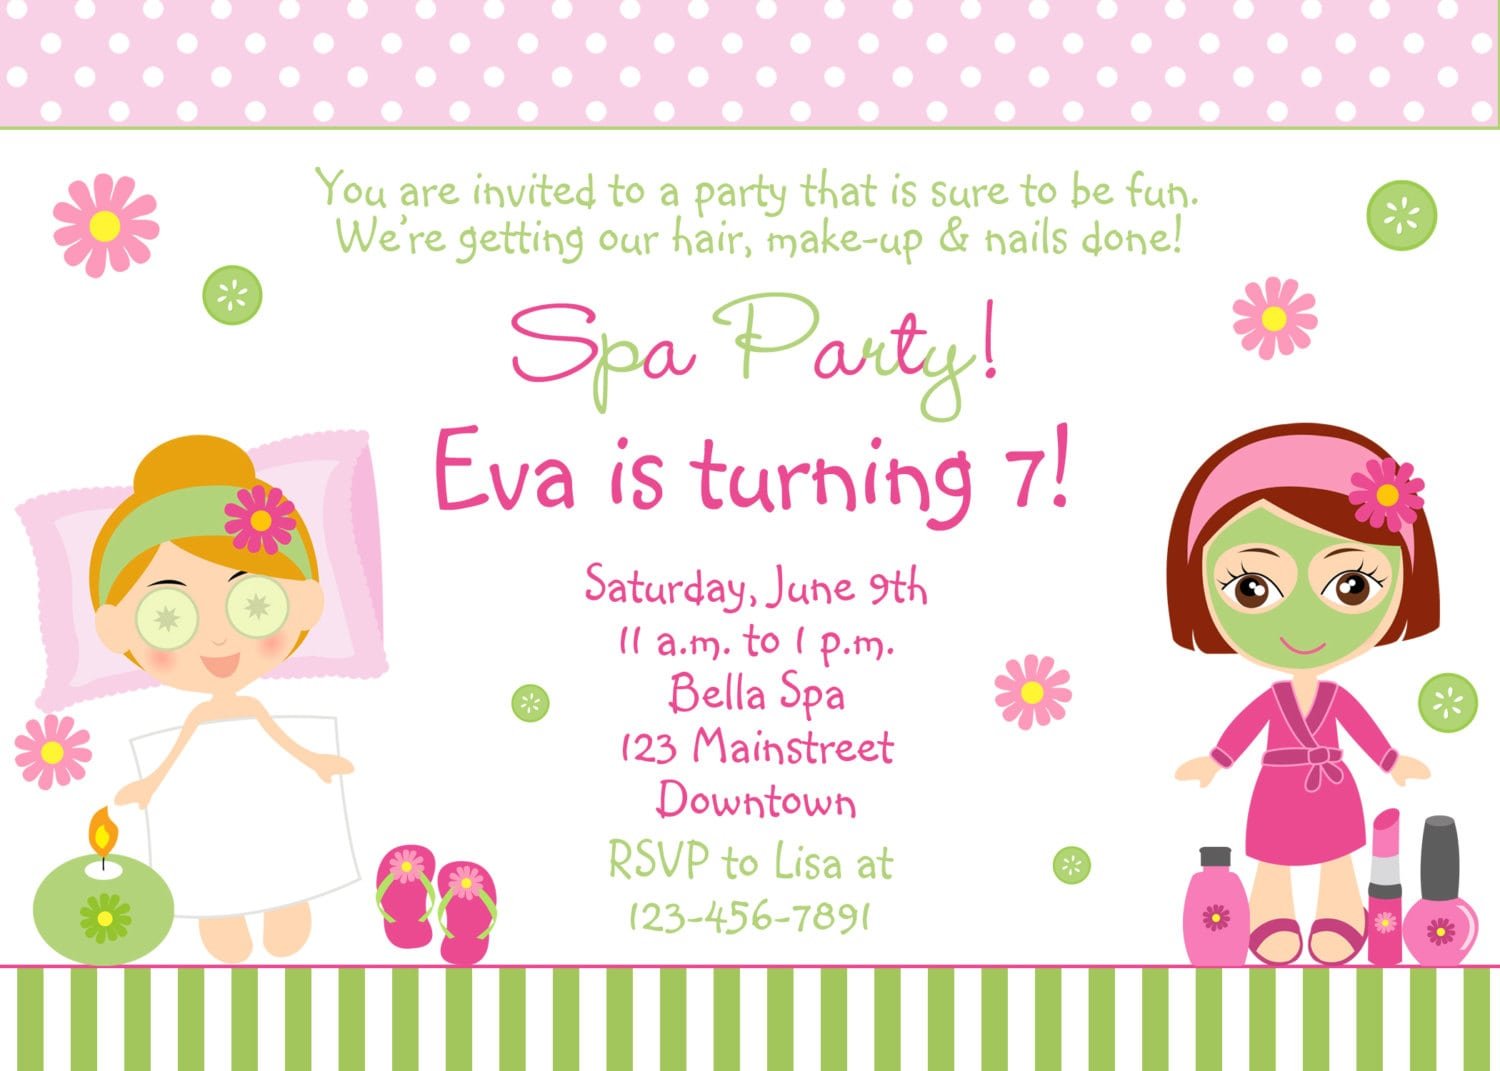 Girls Party Invitations